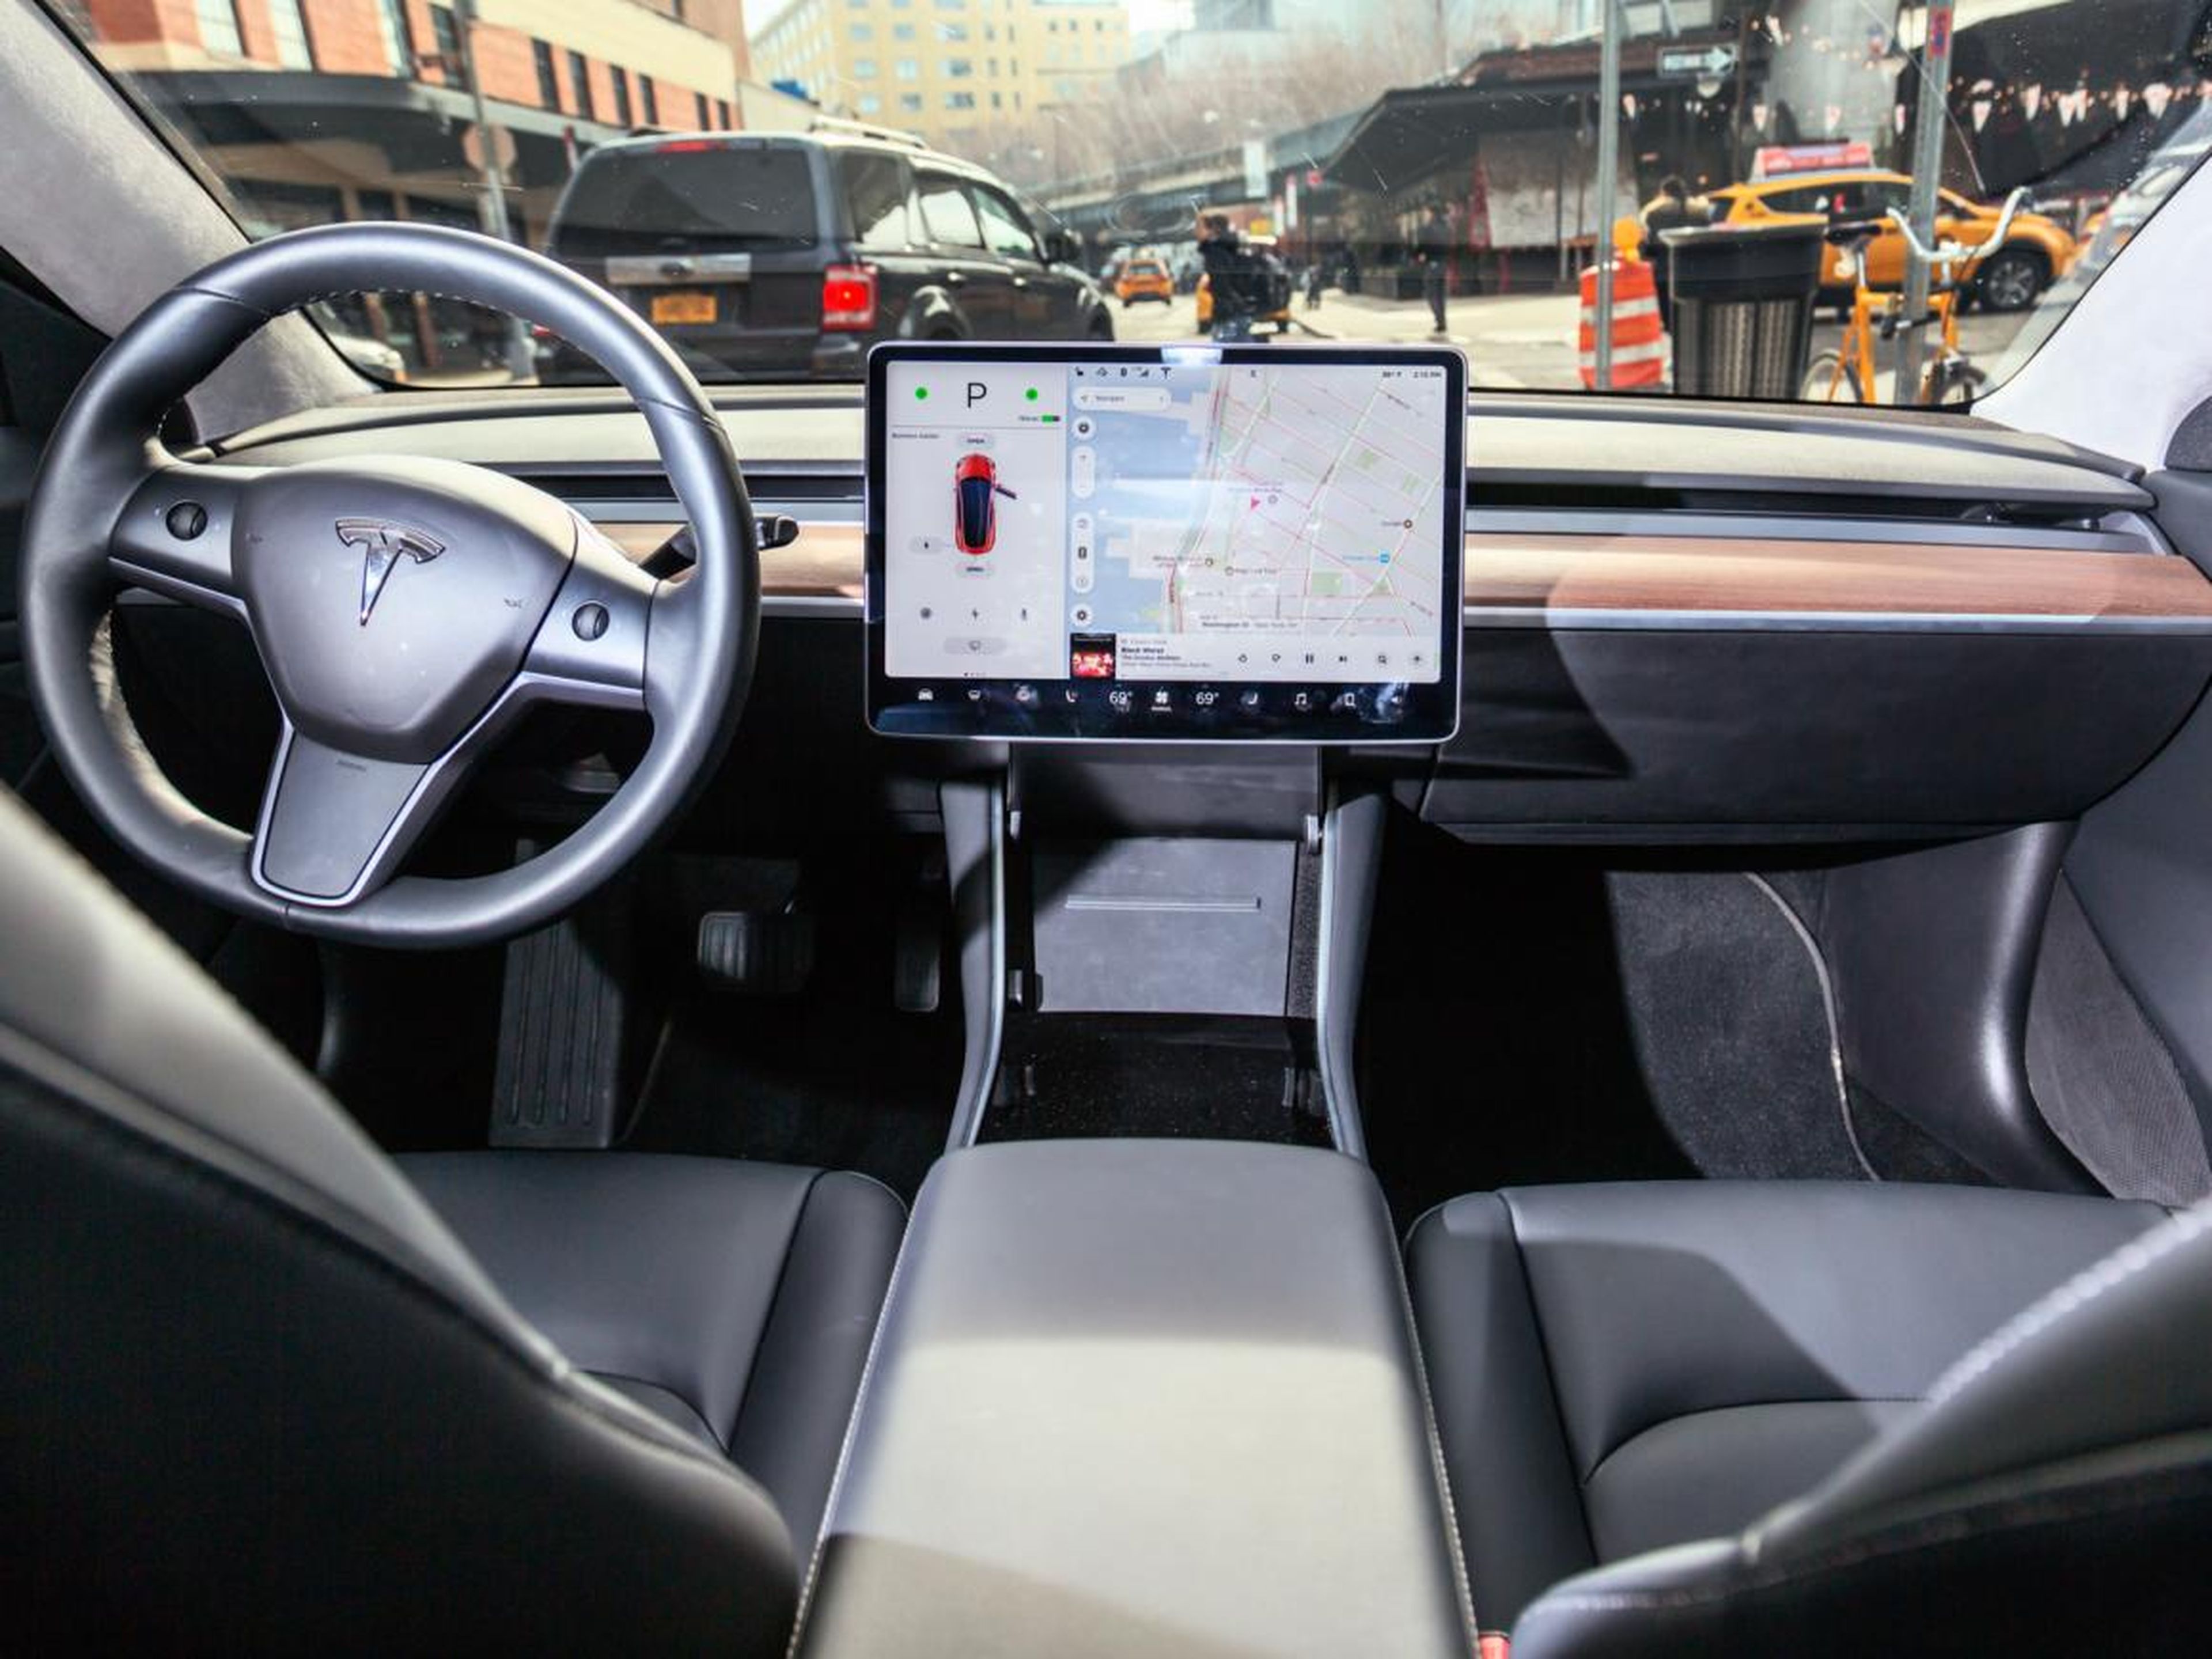 Here's what the interior of the Model 3 looks like. Settings and information are largely concentrated in the touchscreen.